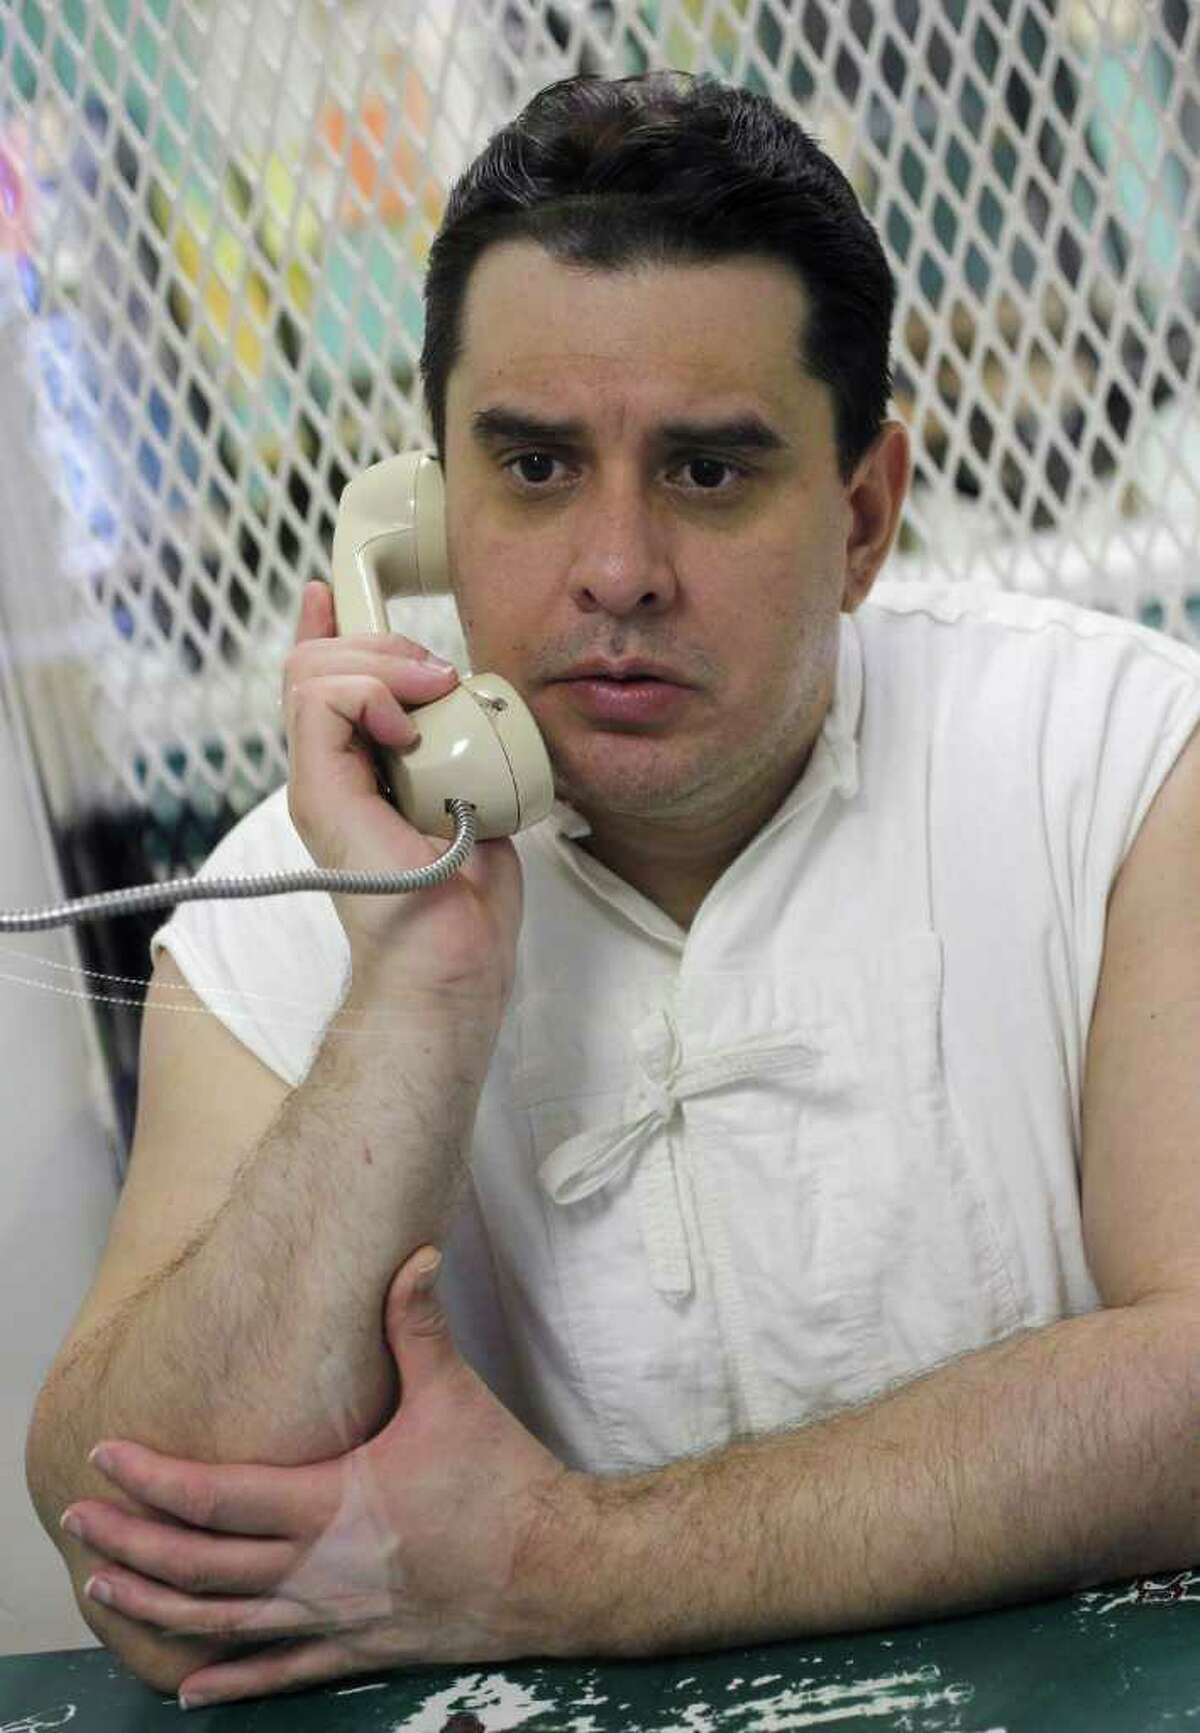 In this Wednesday, Feb. 15, 2012, photo, George Rivas speaks about his part in the crime rampage by the Texas Seven from death row in the Allan Polunsky Unit prison in Livingston, Texas. On Dec. 13, 2000, Rivas’ gang overpowered workers at the Texas Department of Criminal Justice Connally Unit prison in Kenedy and stolThe leader of the fugitive gang known as the "Texas 7" was executed February 29, 2012 for killing a suburban Dallas police officer during a robbery 11 years before after organizing and pulling off Texas' biggest prison break. Last words: "Yes, I do. First of all for the Aubrey Hawkins family, I do apologize for everything that happened. Not because I am here, but for closure in your hearts. I really believe that you deserve that. To my wife, Cheri, I am so grateful you're in my life. I love you so dearly. Thank you to my sister and dear friend Katherine Cox, my son and family, friends and family. I love you so dearly. To my friends, all the guys on the row, you have my courtesy and respect. Thank you to the people involved and to the courtesy of the officers. I am grateful for everything in my life. To my wife, take care of yourself. I will be waiting for you. I love you. God Bless. I am ready to go"